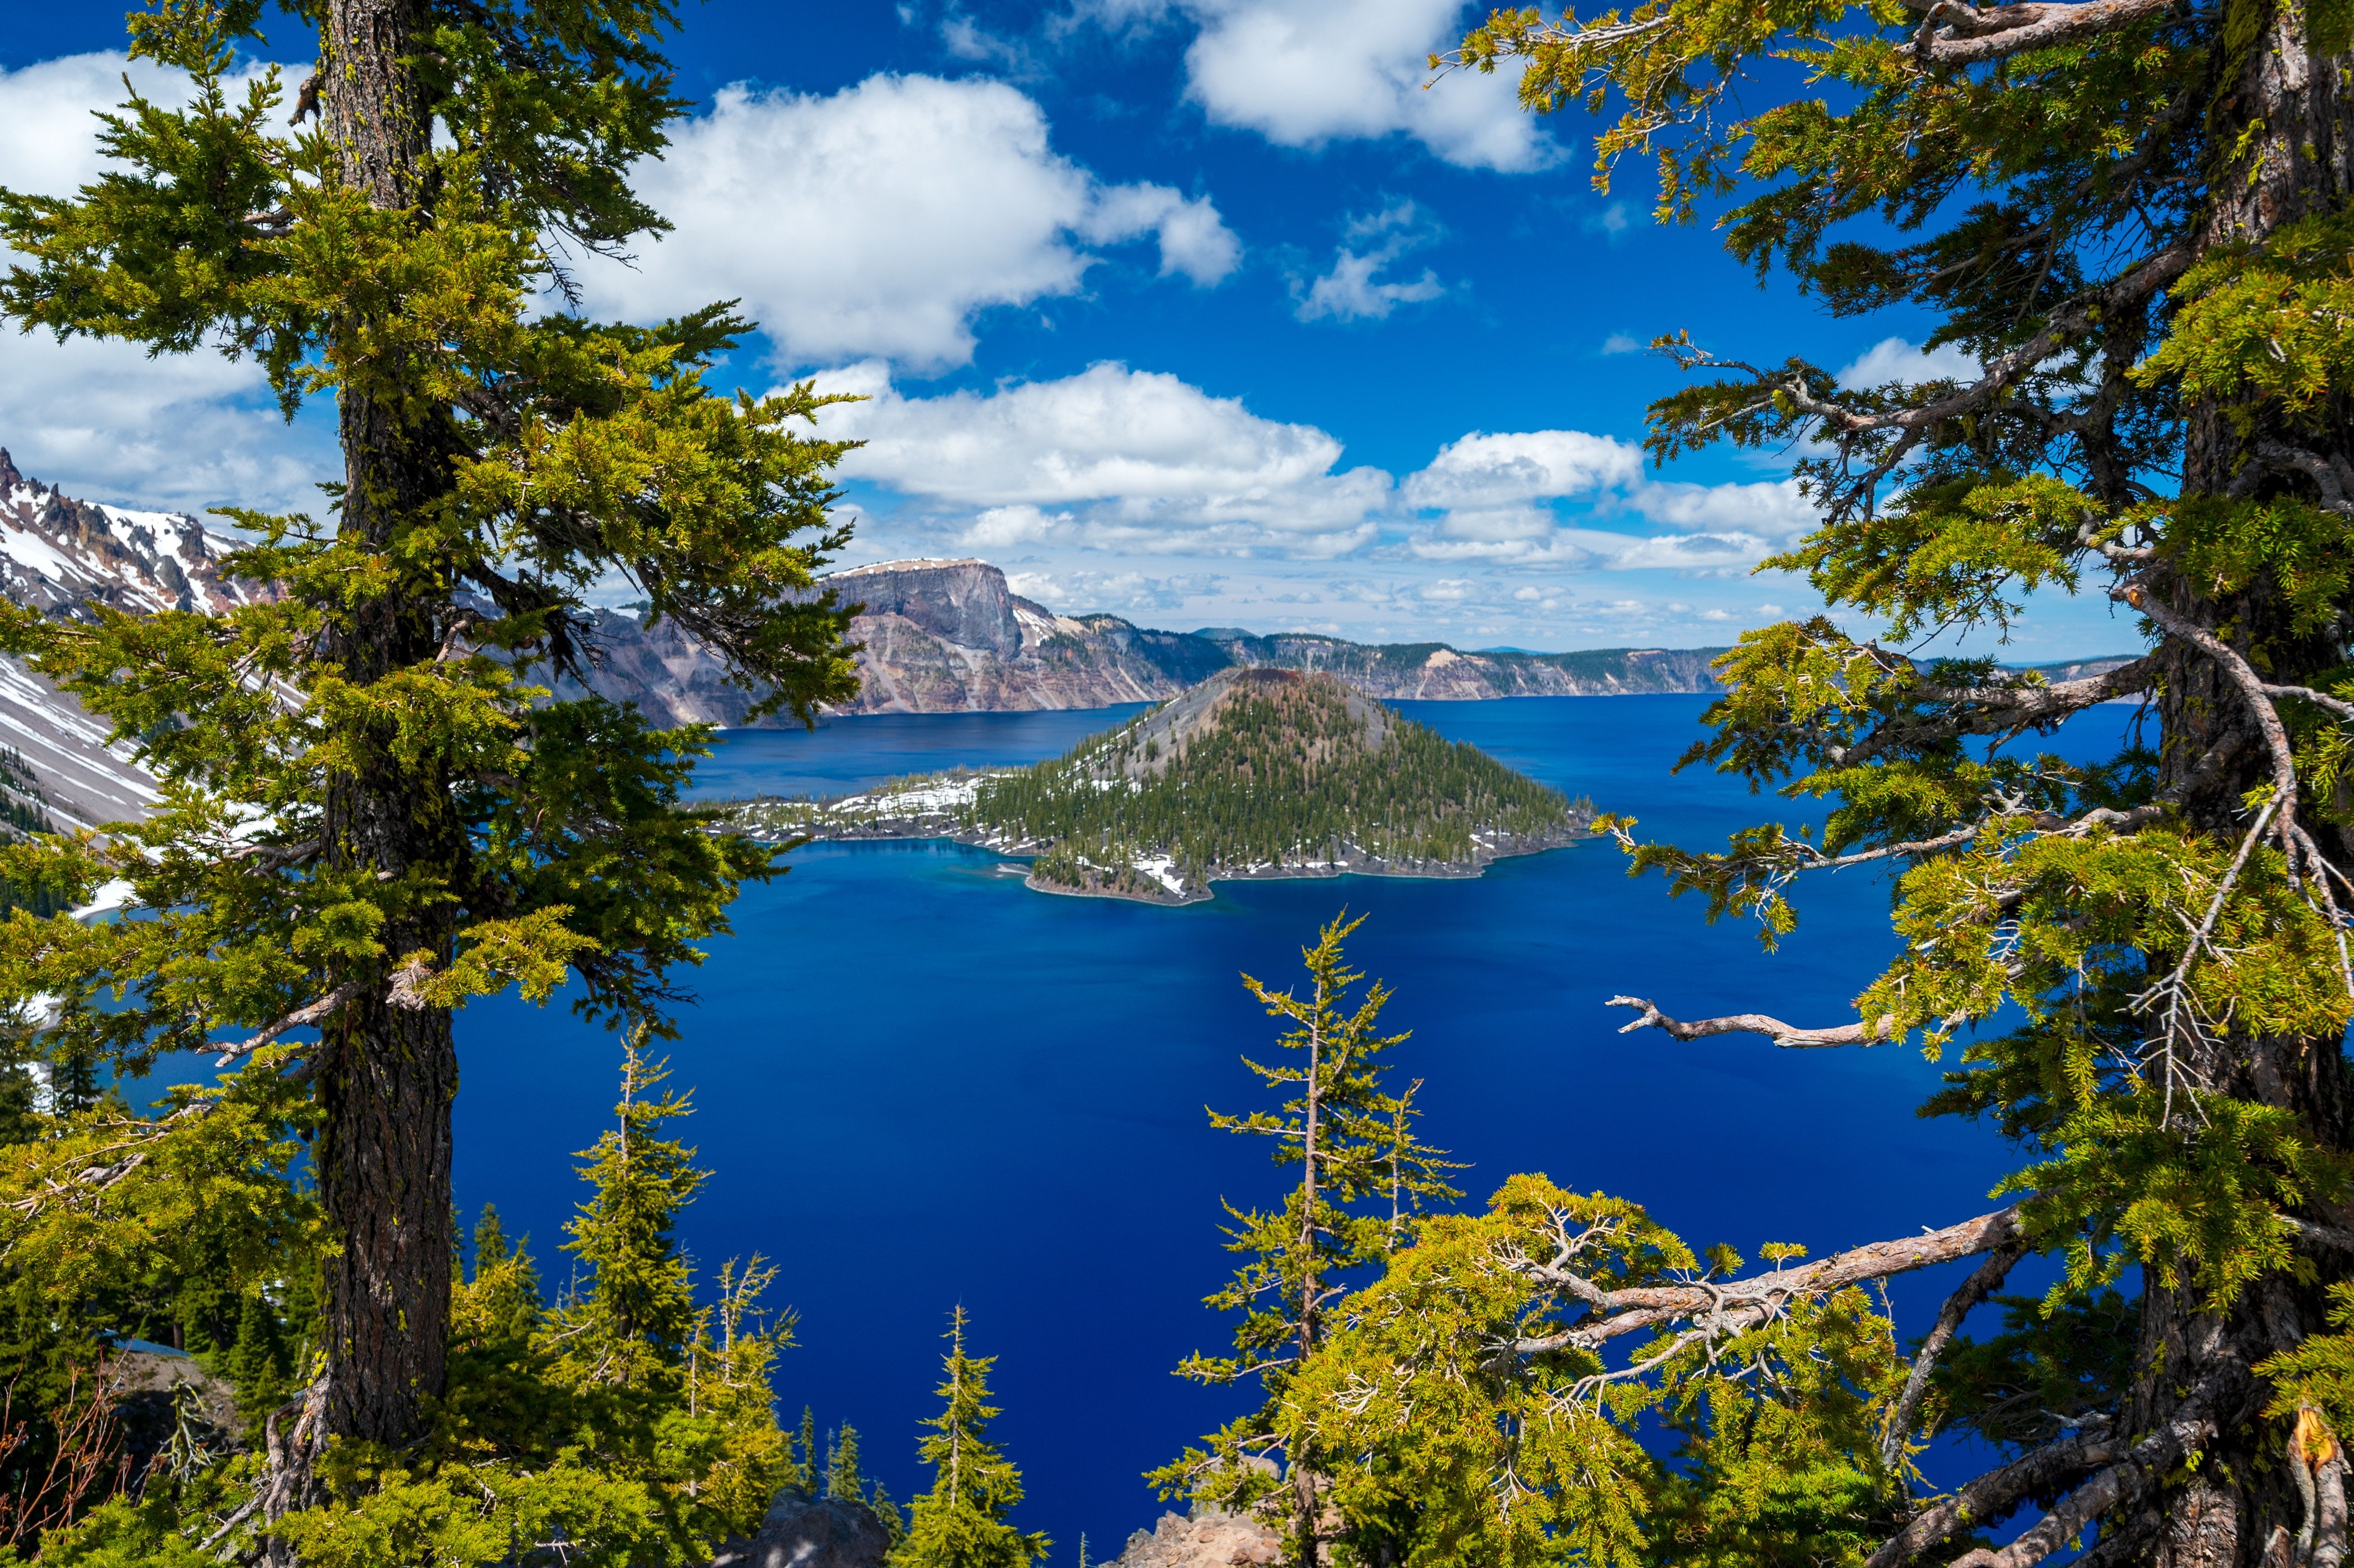 Crater Lake, Oregon - the clearest waters in the world - ratepunk